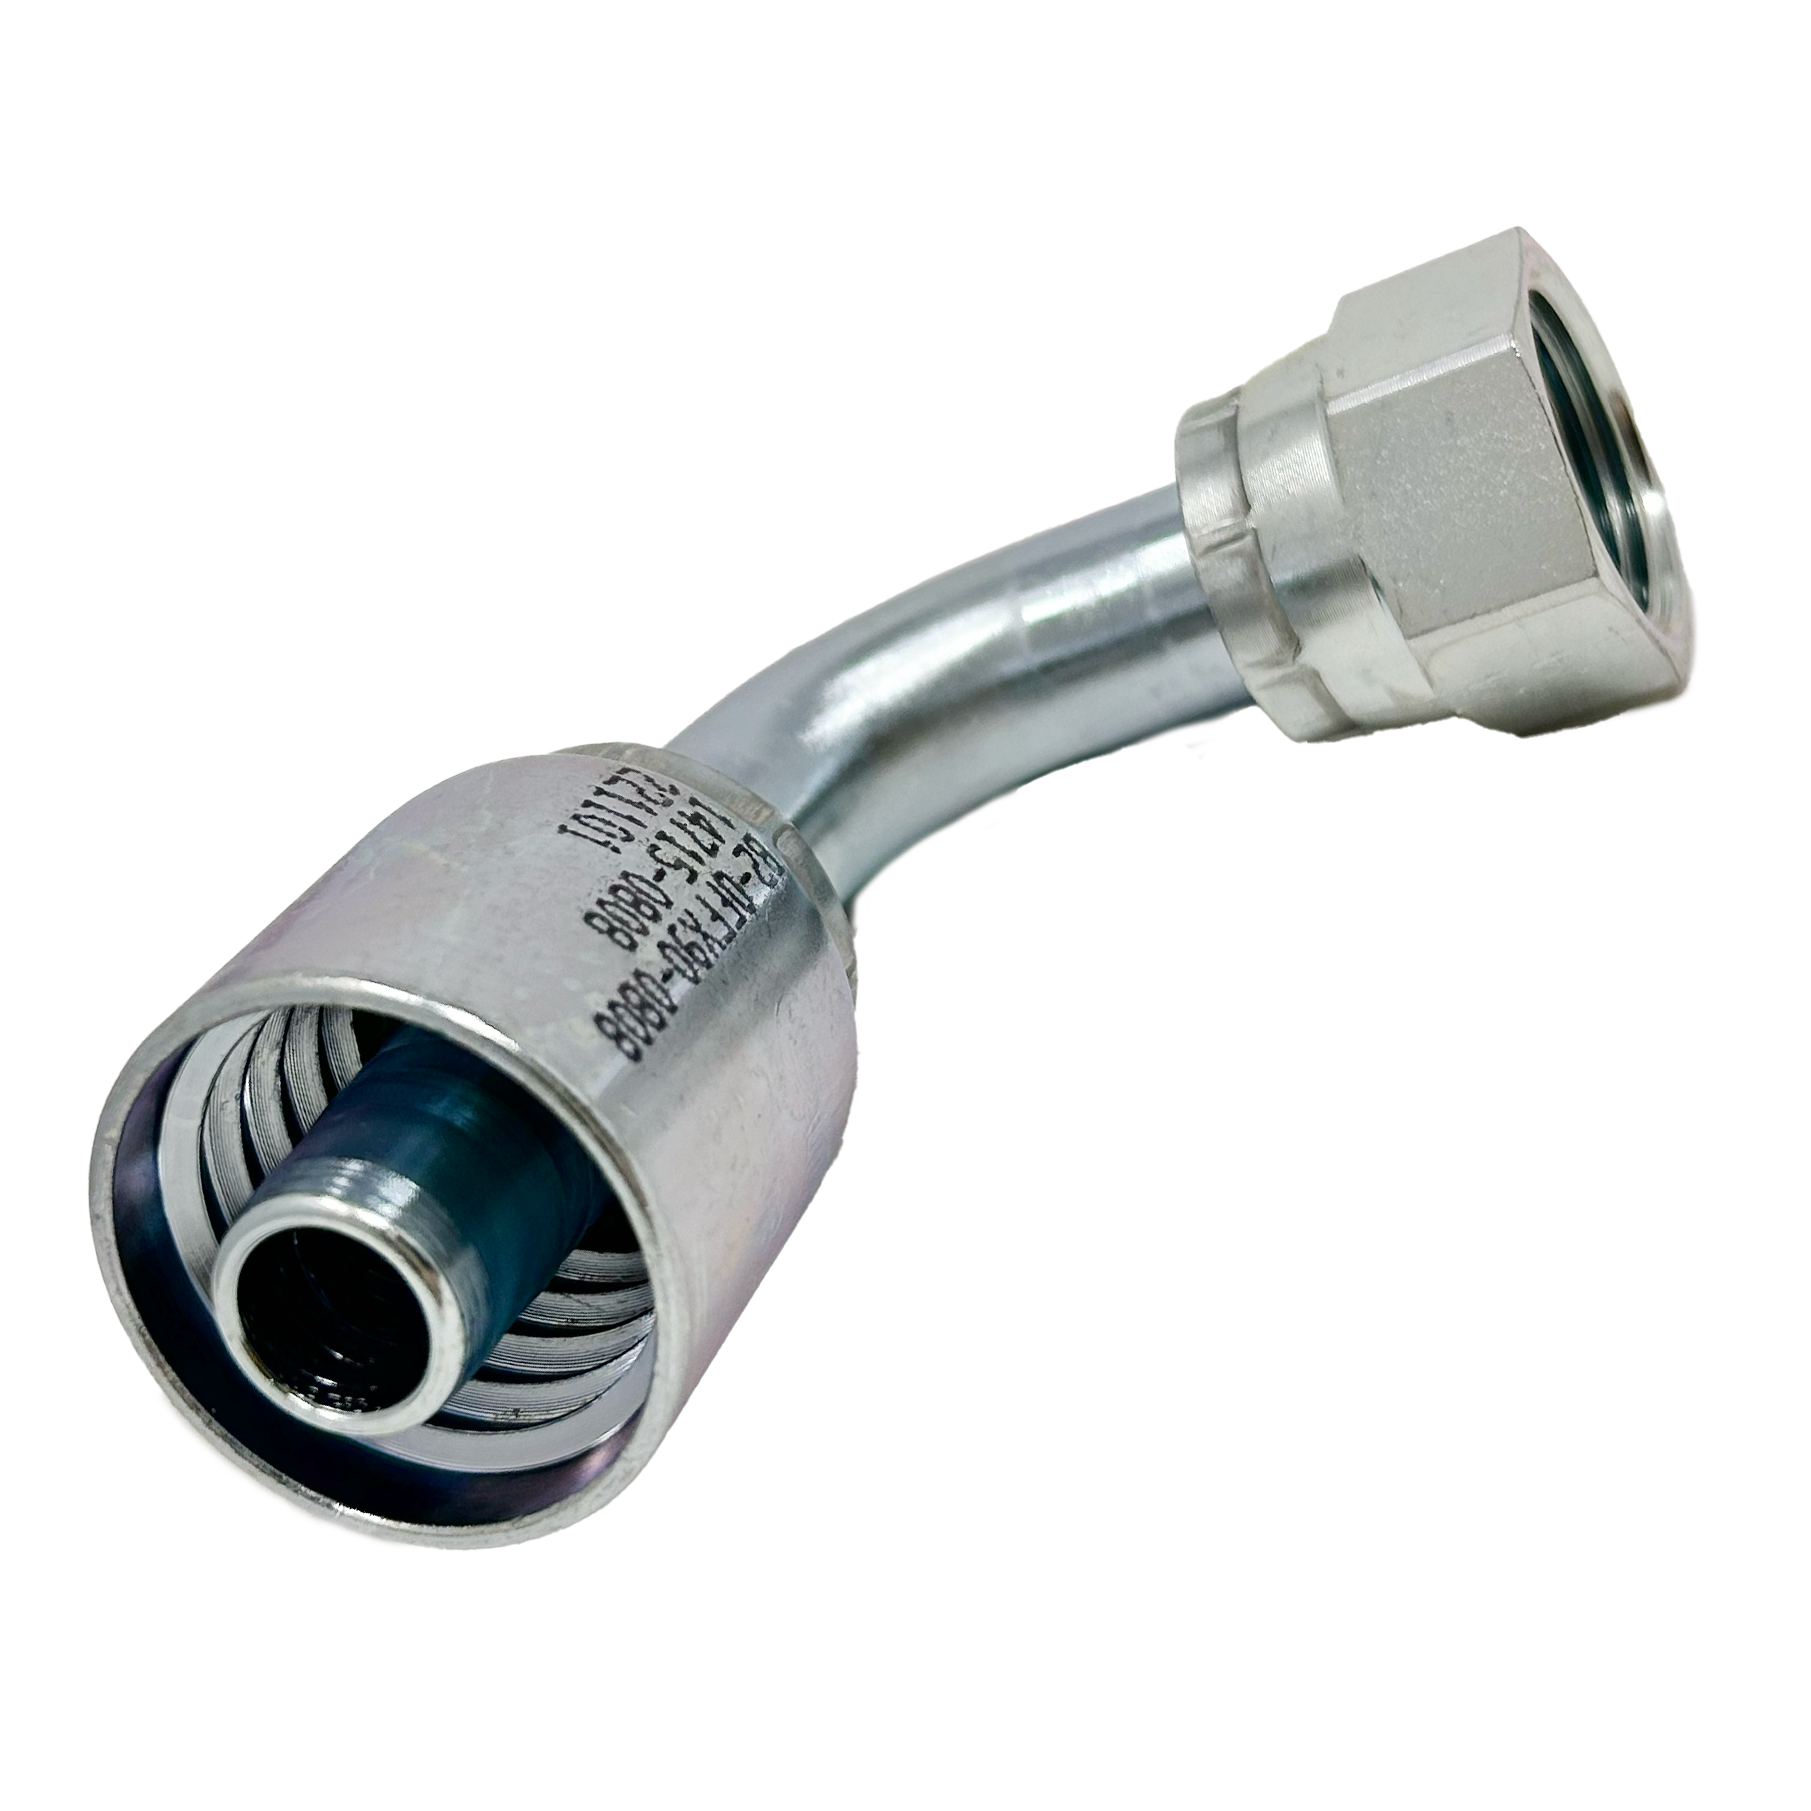 B2-OFFX90-0808: Continental Hose Fitting, 0.5 (1/2") Hose ID x 13/16-16 Female ORFS, 90-Degree Swivel Connection